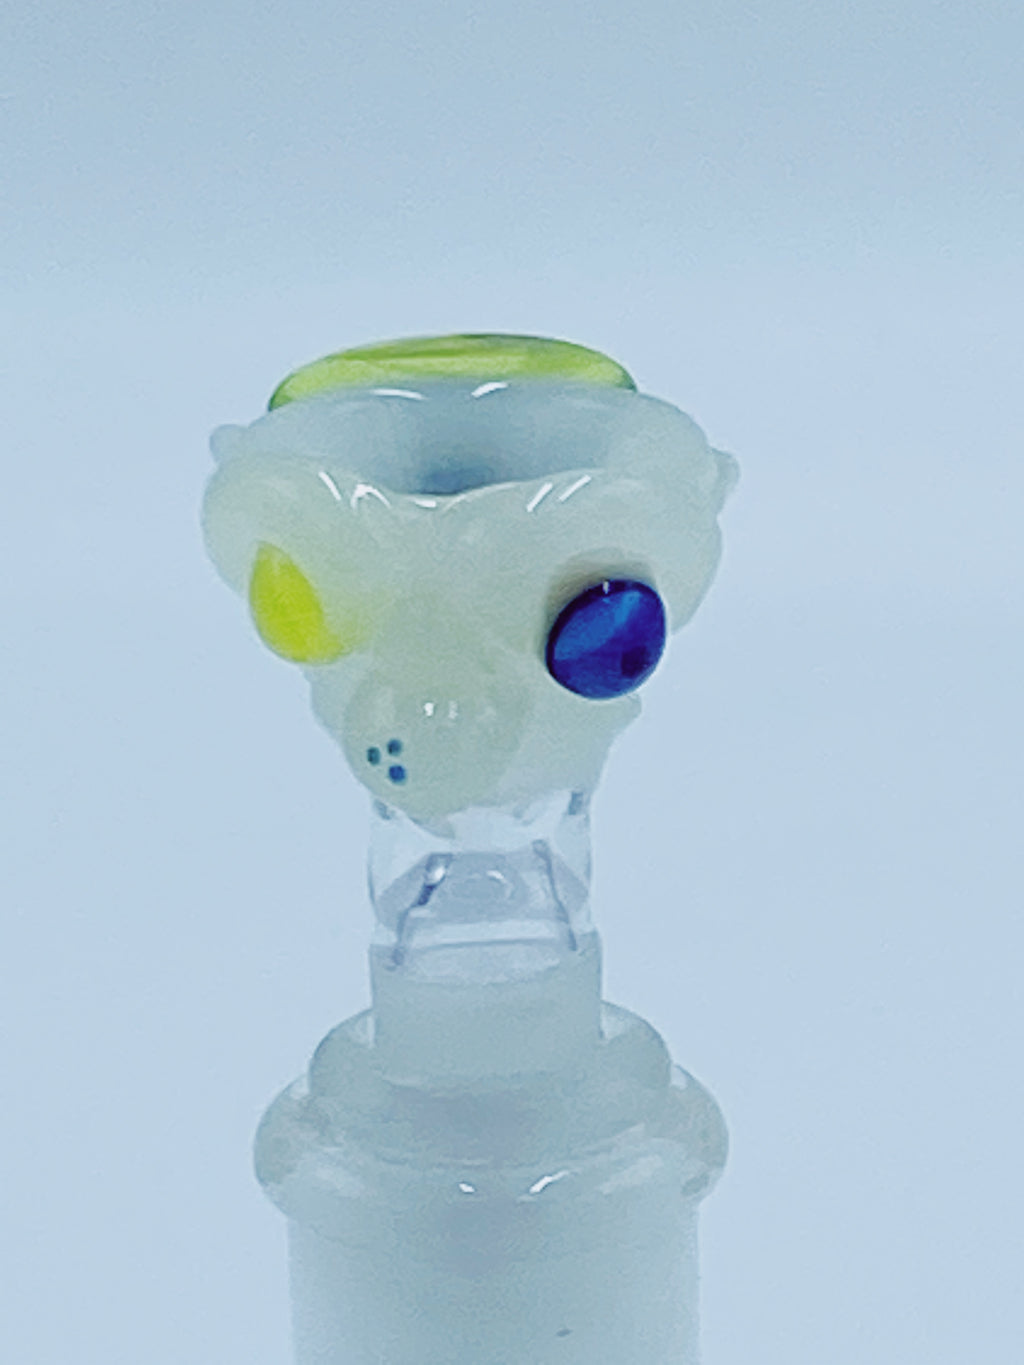 MELT GLASS 14MM FLORESCENT MONSTER BOWL - Smoke Country - Land of the artistic glass blown bongs